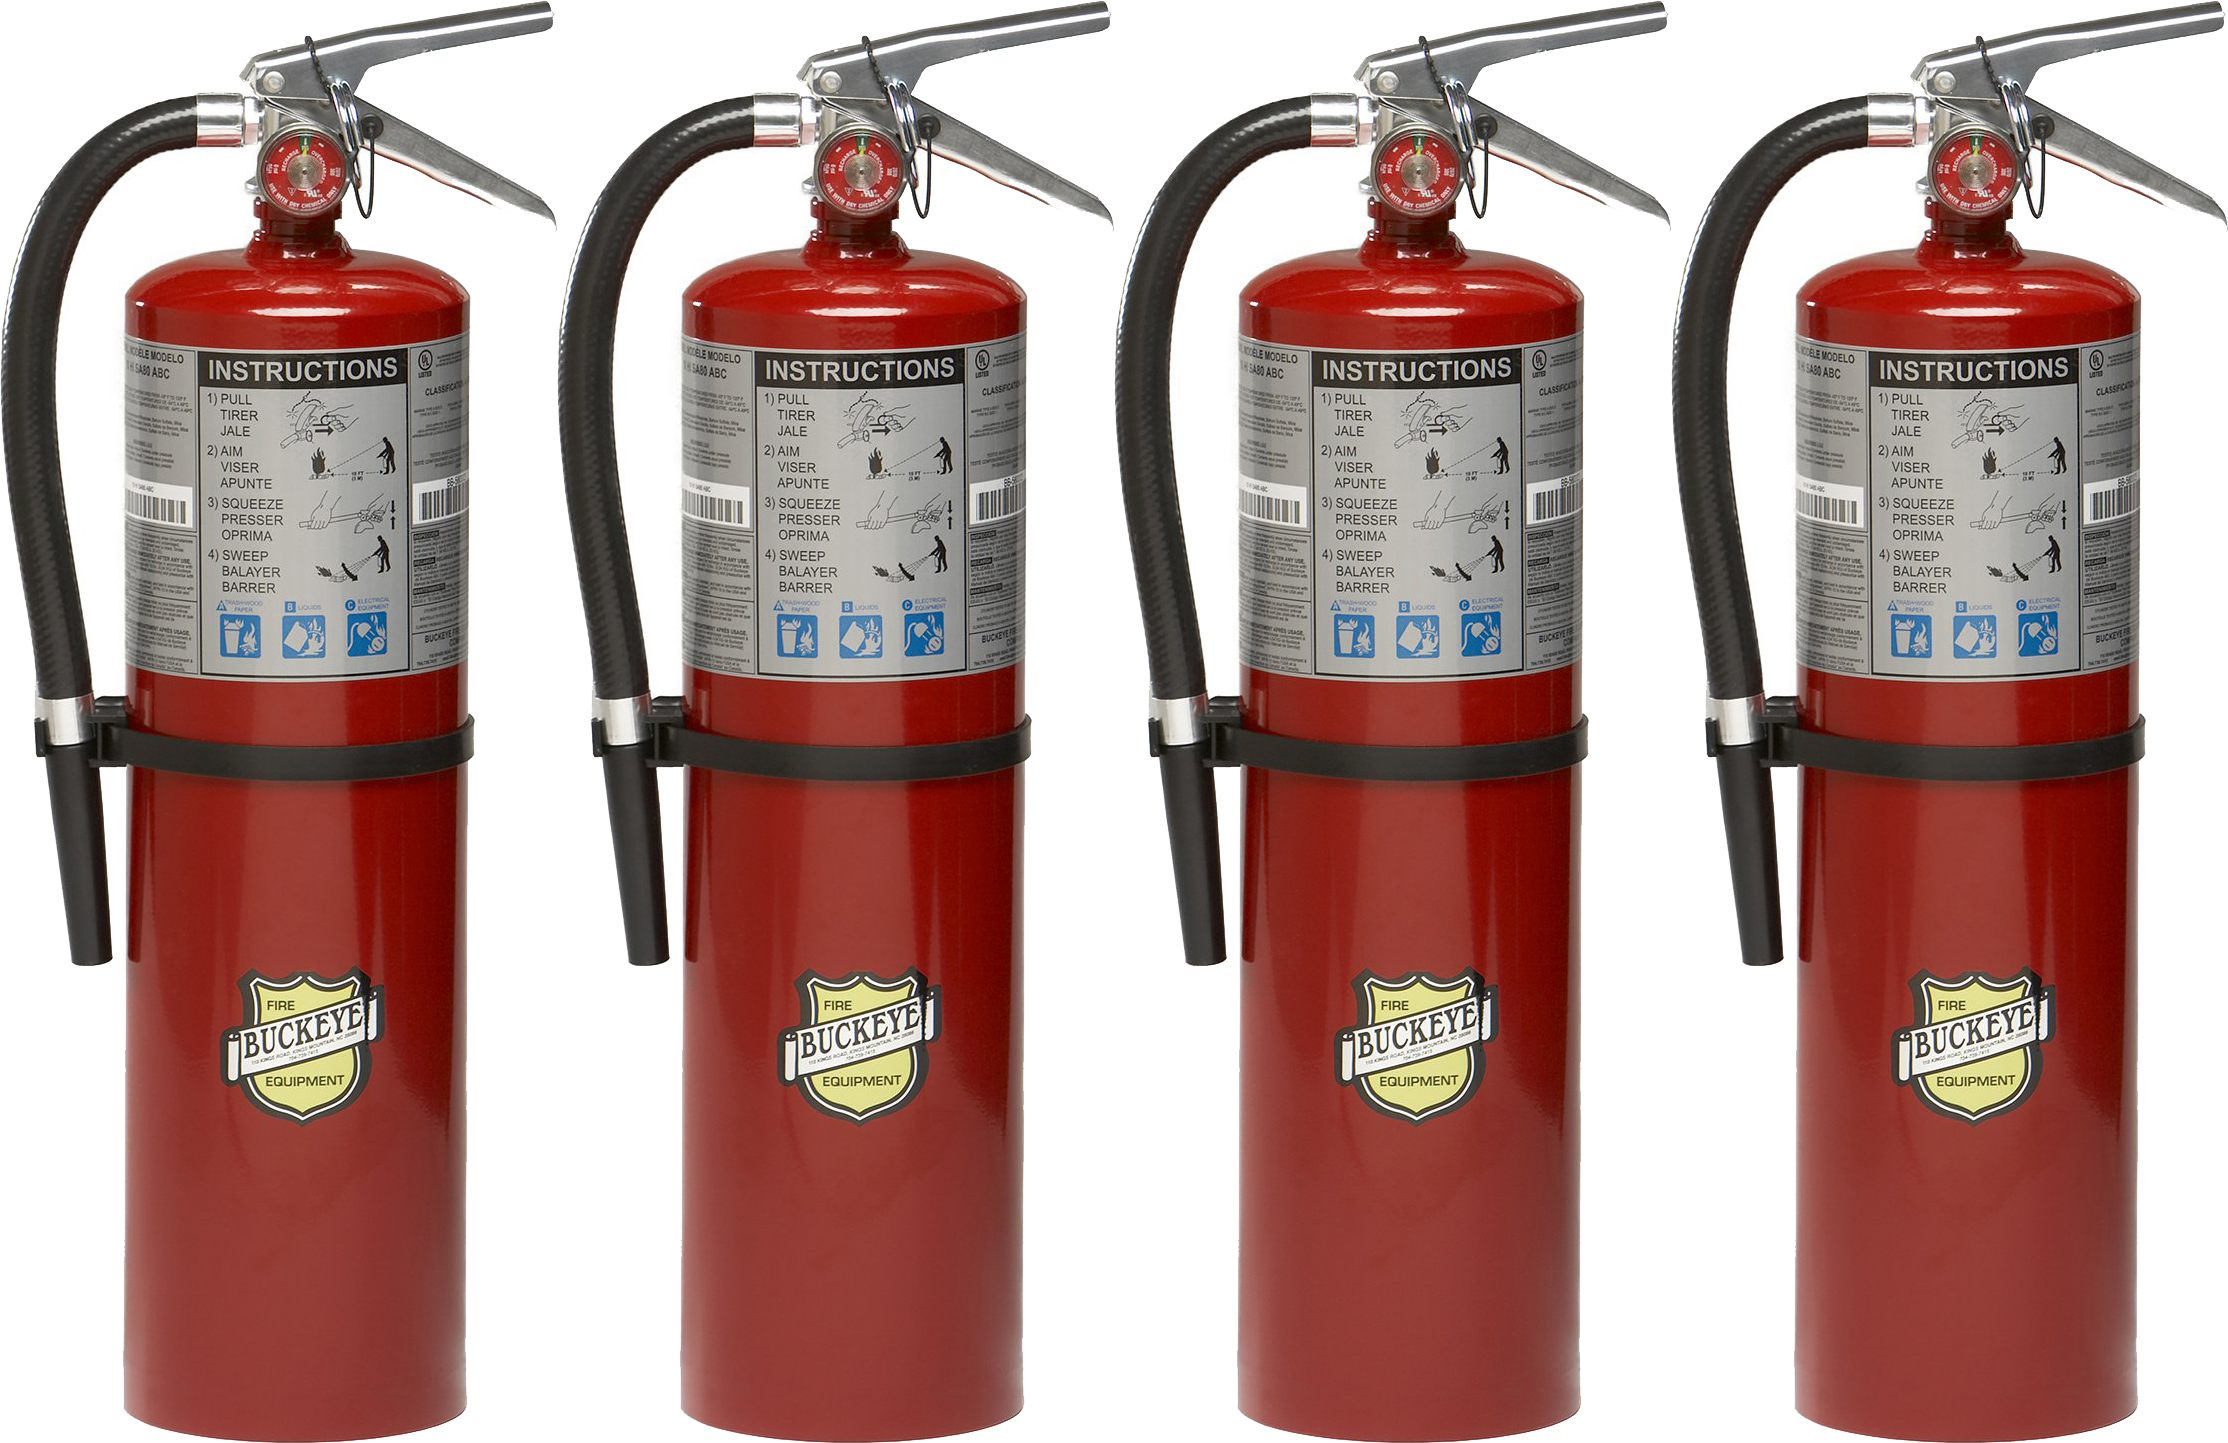 Pack of 4 Buckeye 11340 ABC Multipurpose Dry Chemical Hand Held Fire Extinguisher with Aluminum Valve and Wall Hook, 10 lbs Agent Capacity - image 1 of 1